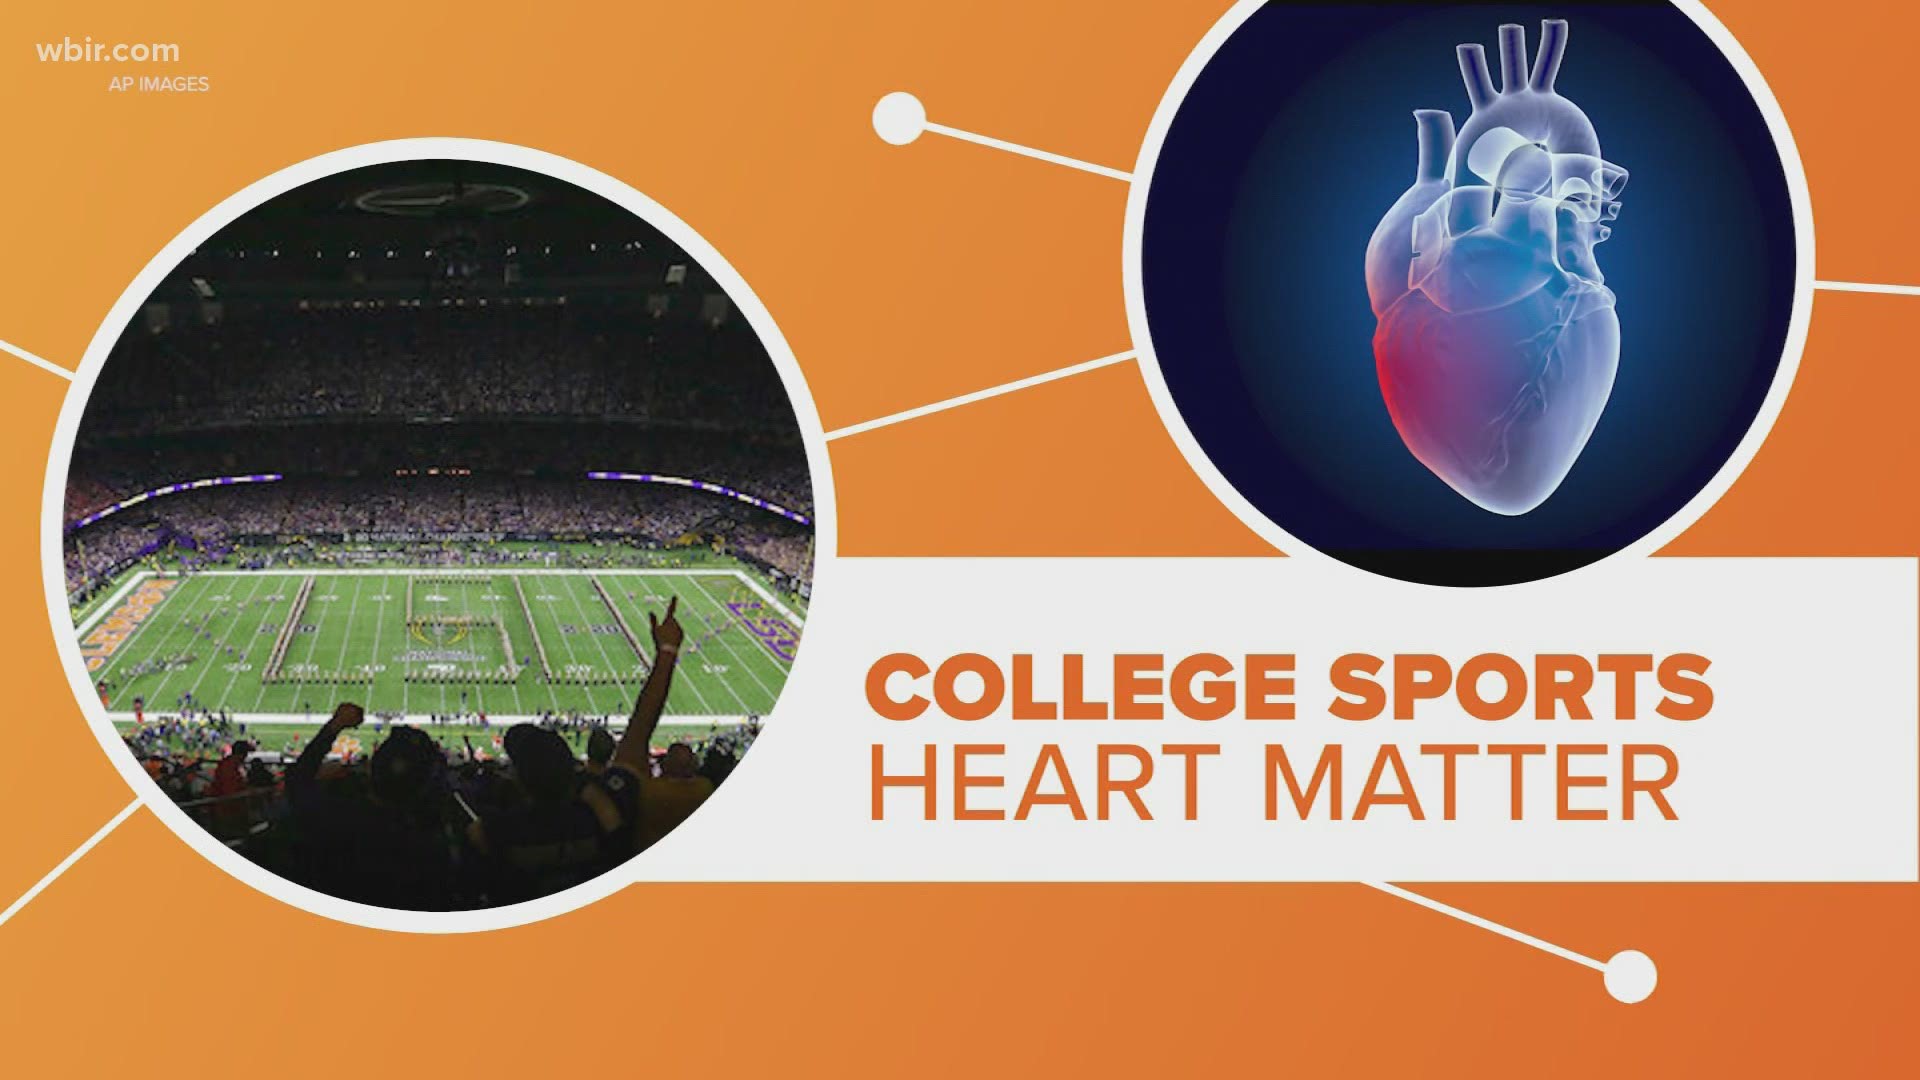 There are a lot of factors going into the decisions being made right now about college sports but it looks like long term health effects are at the heart of it.